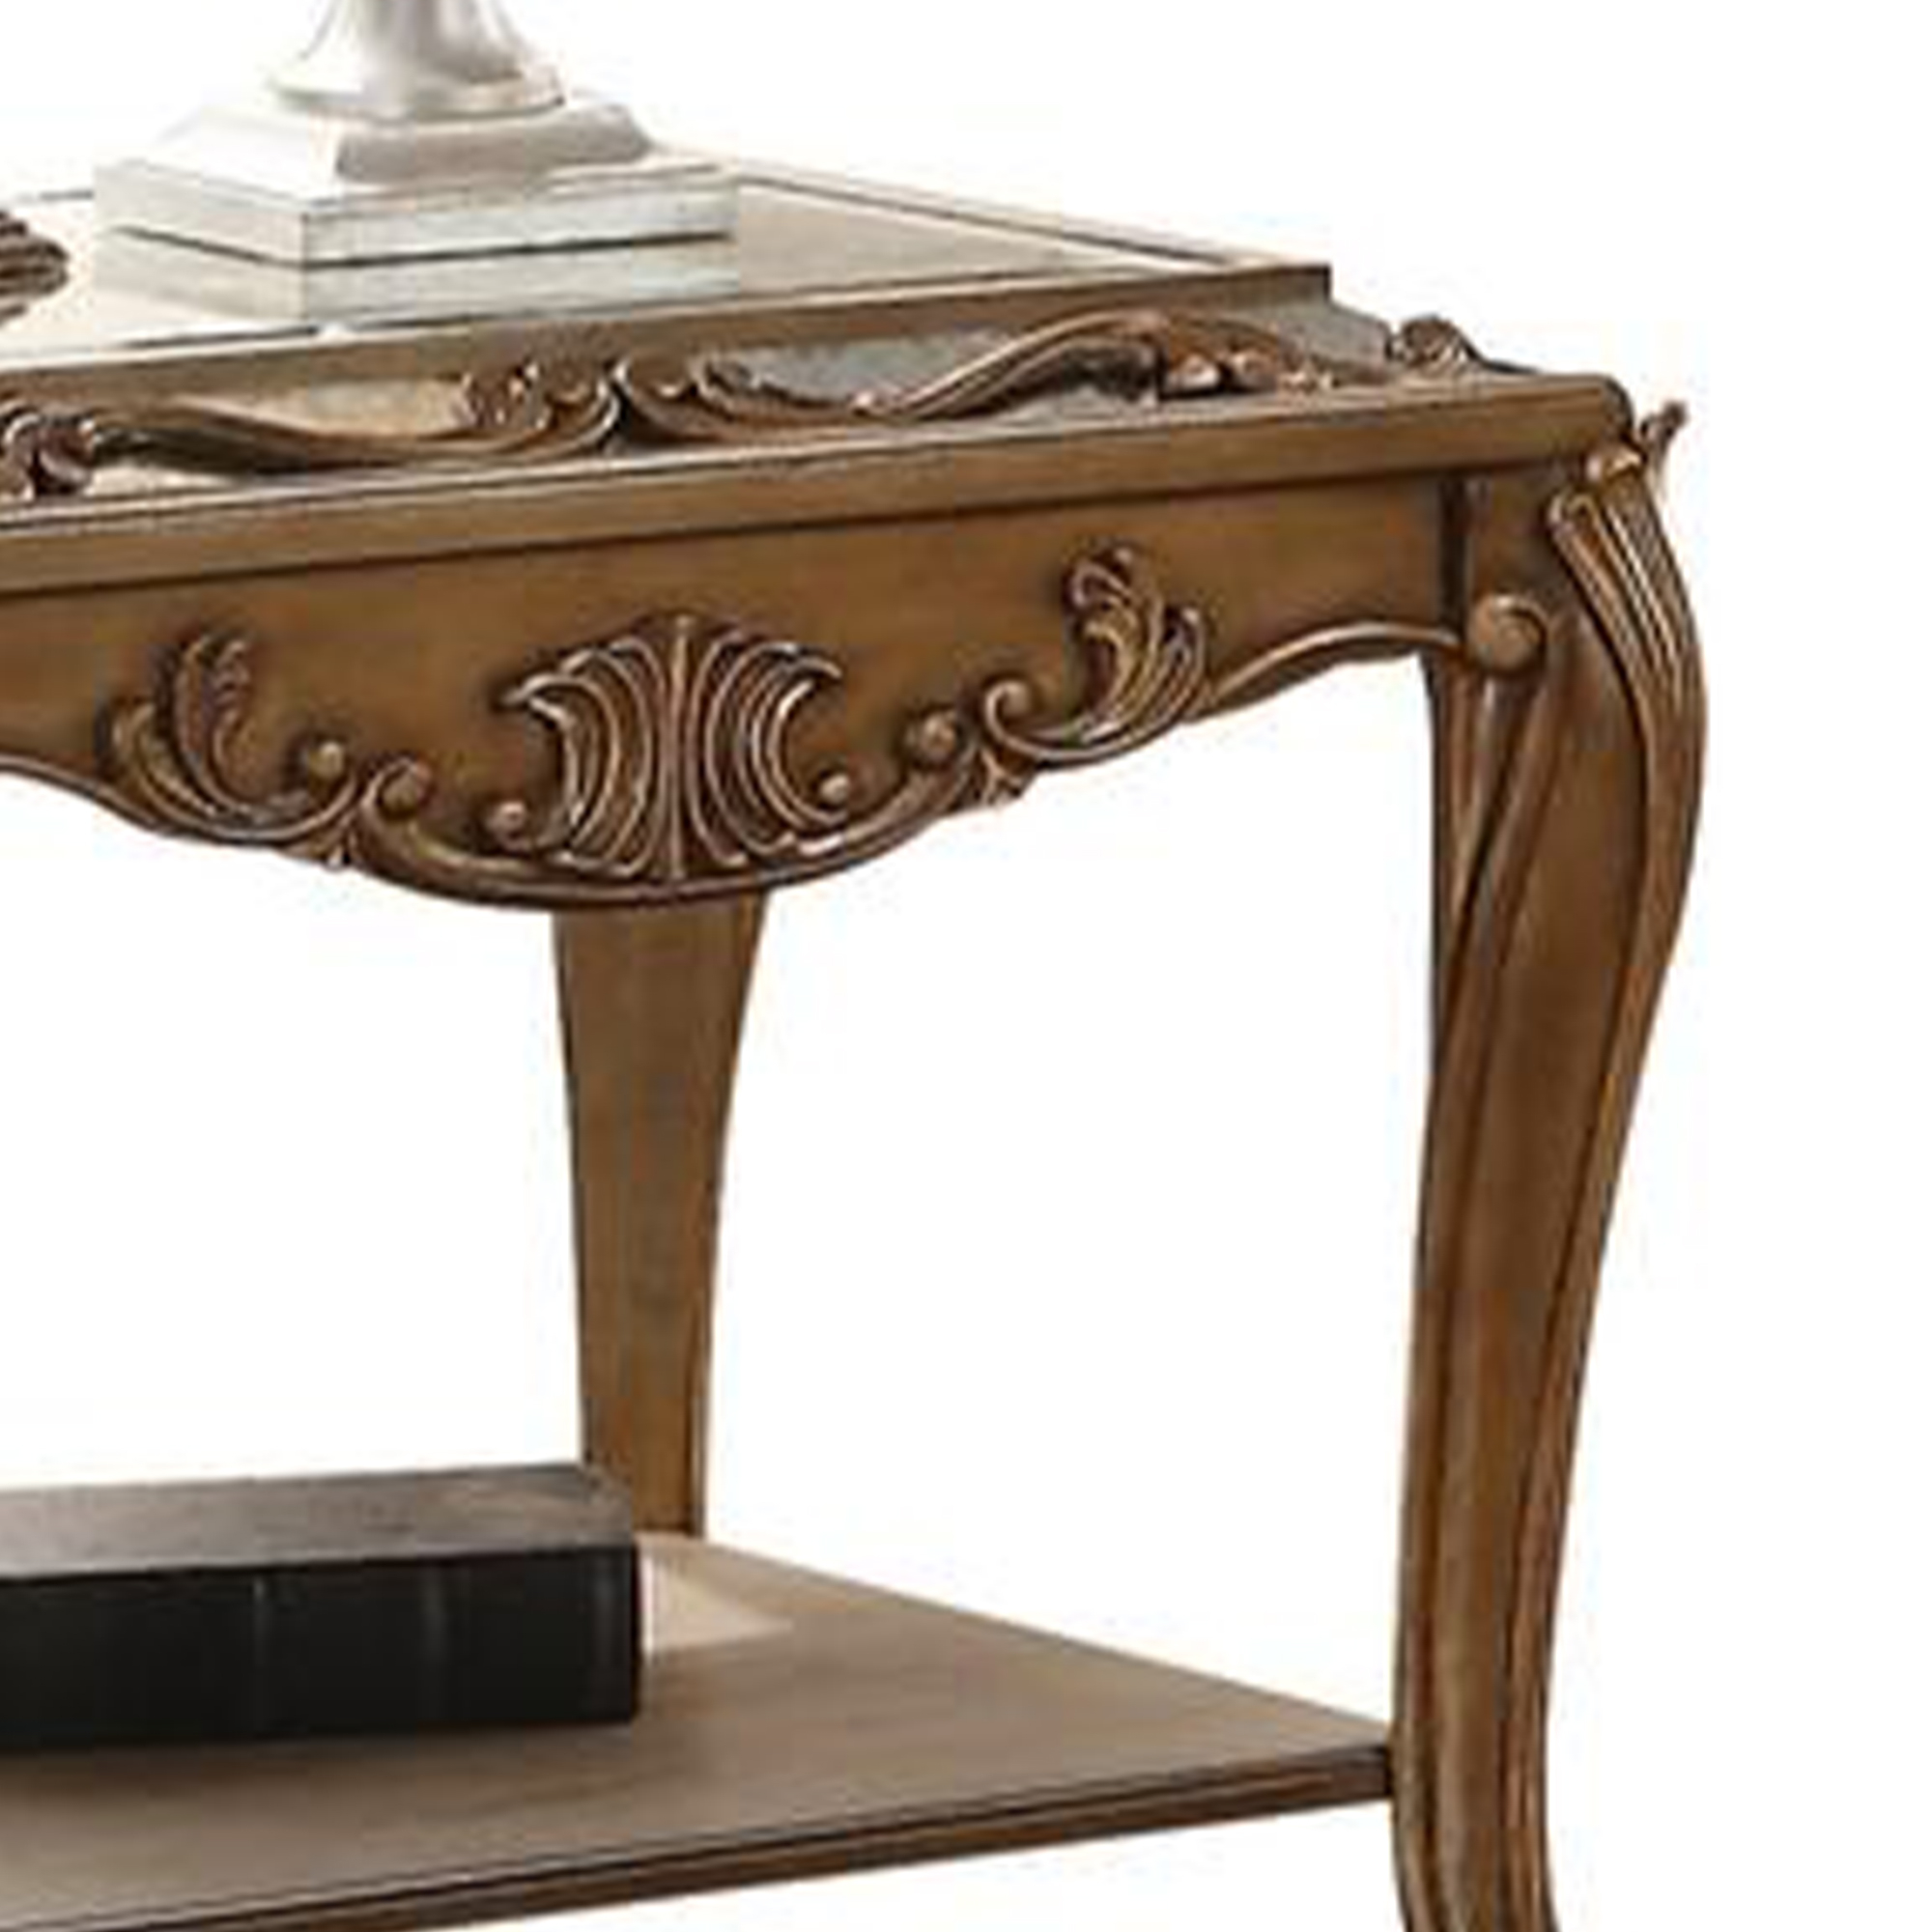 ACME Orianne End Table in Mirrored and Antique Gold - image 4 of 4